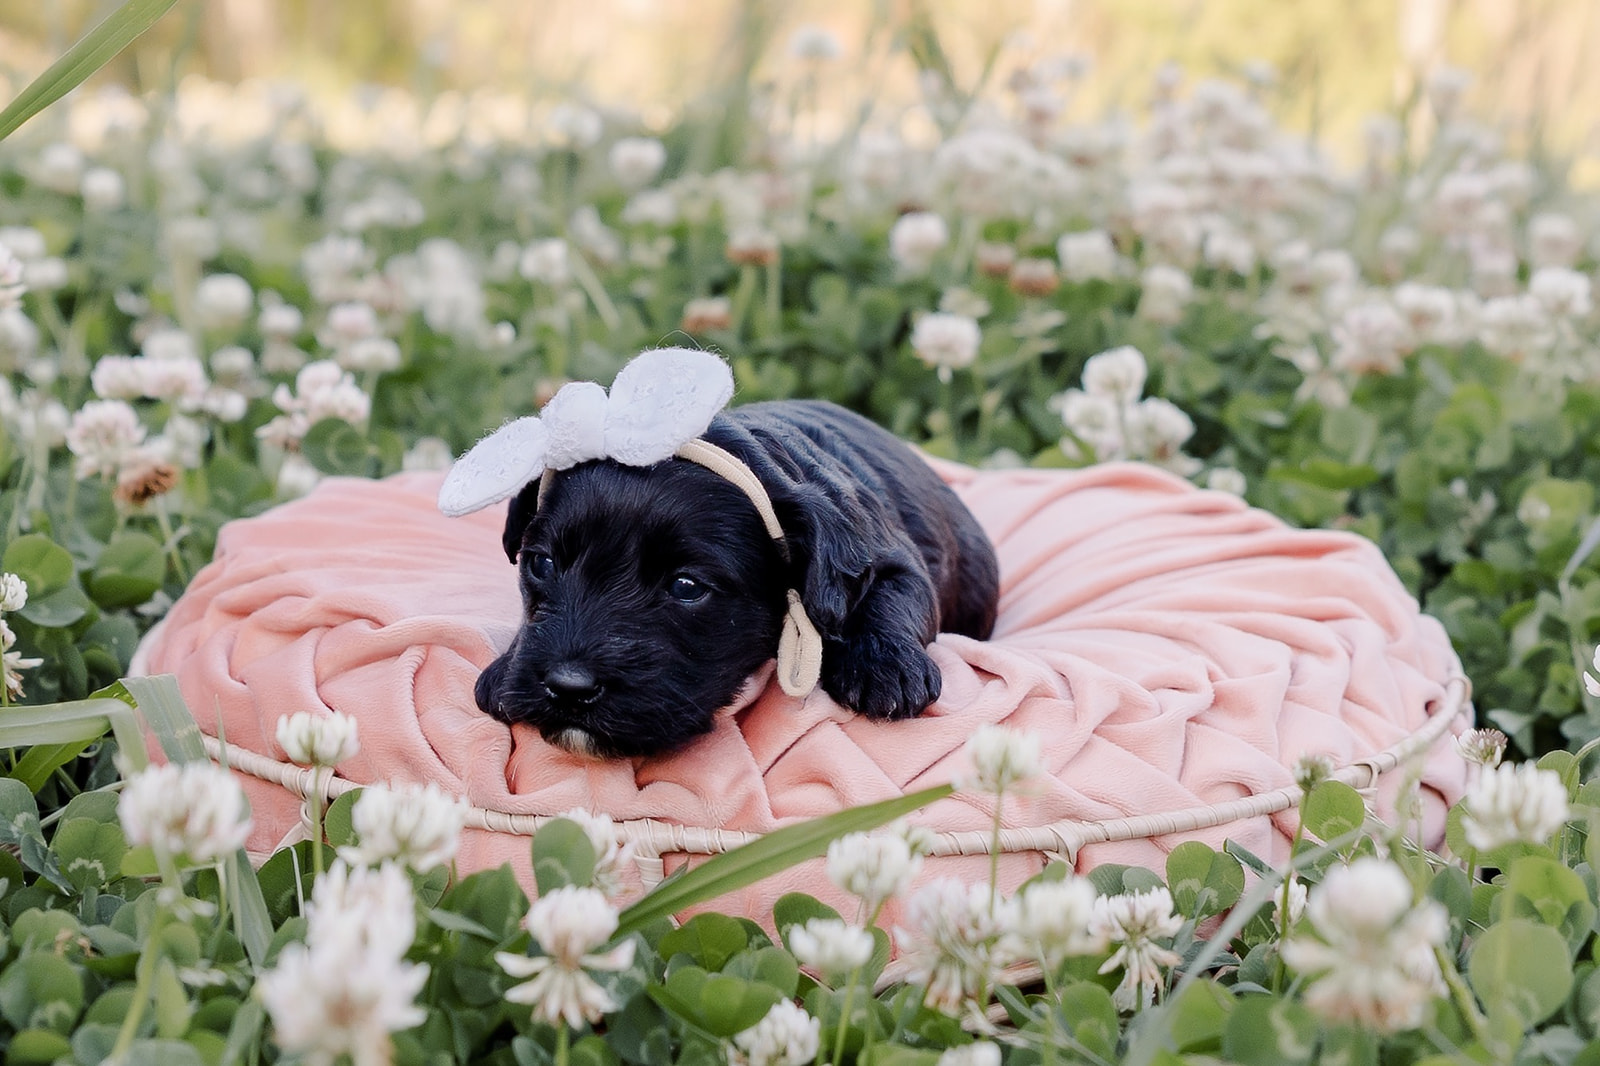 Black Mini Australian Labradoodle laying on pink pillow among the clover